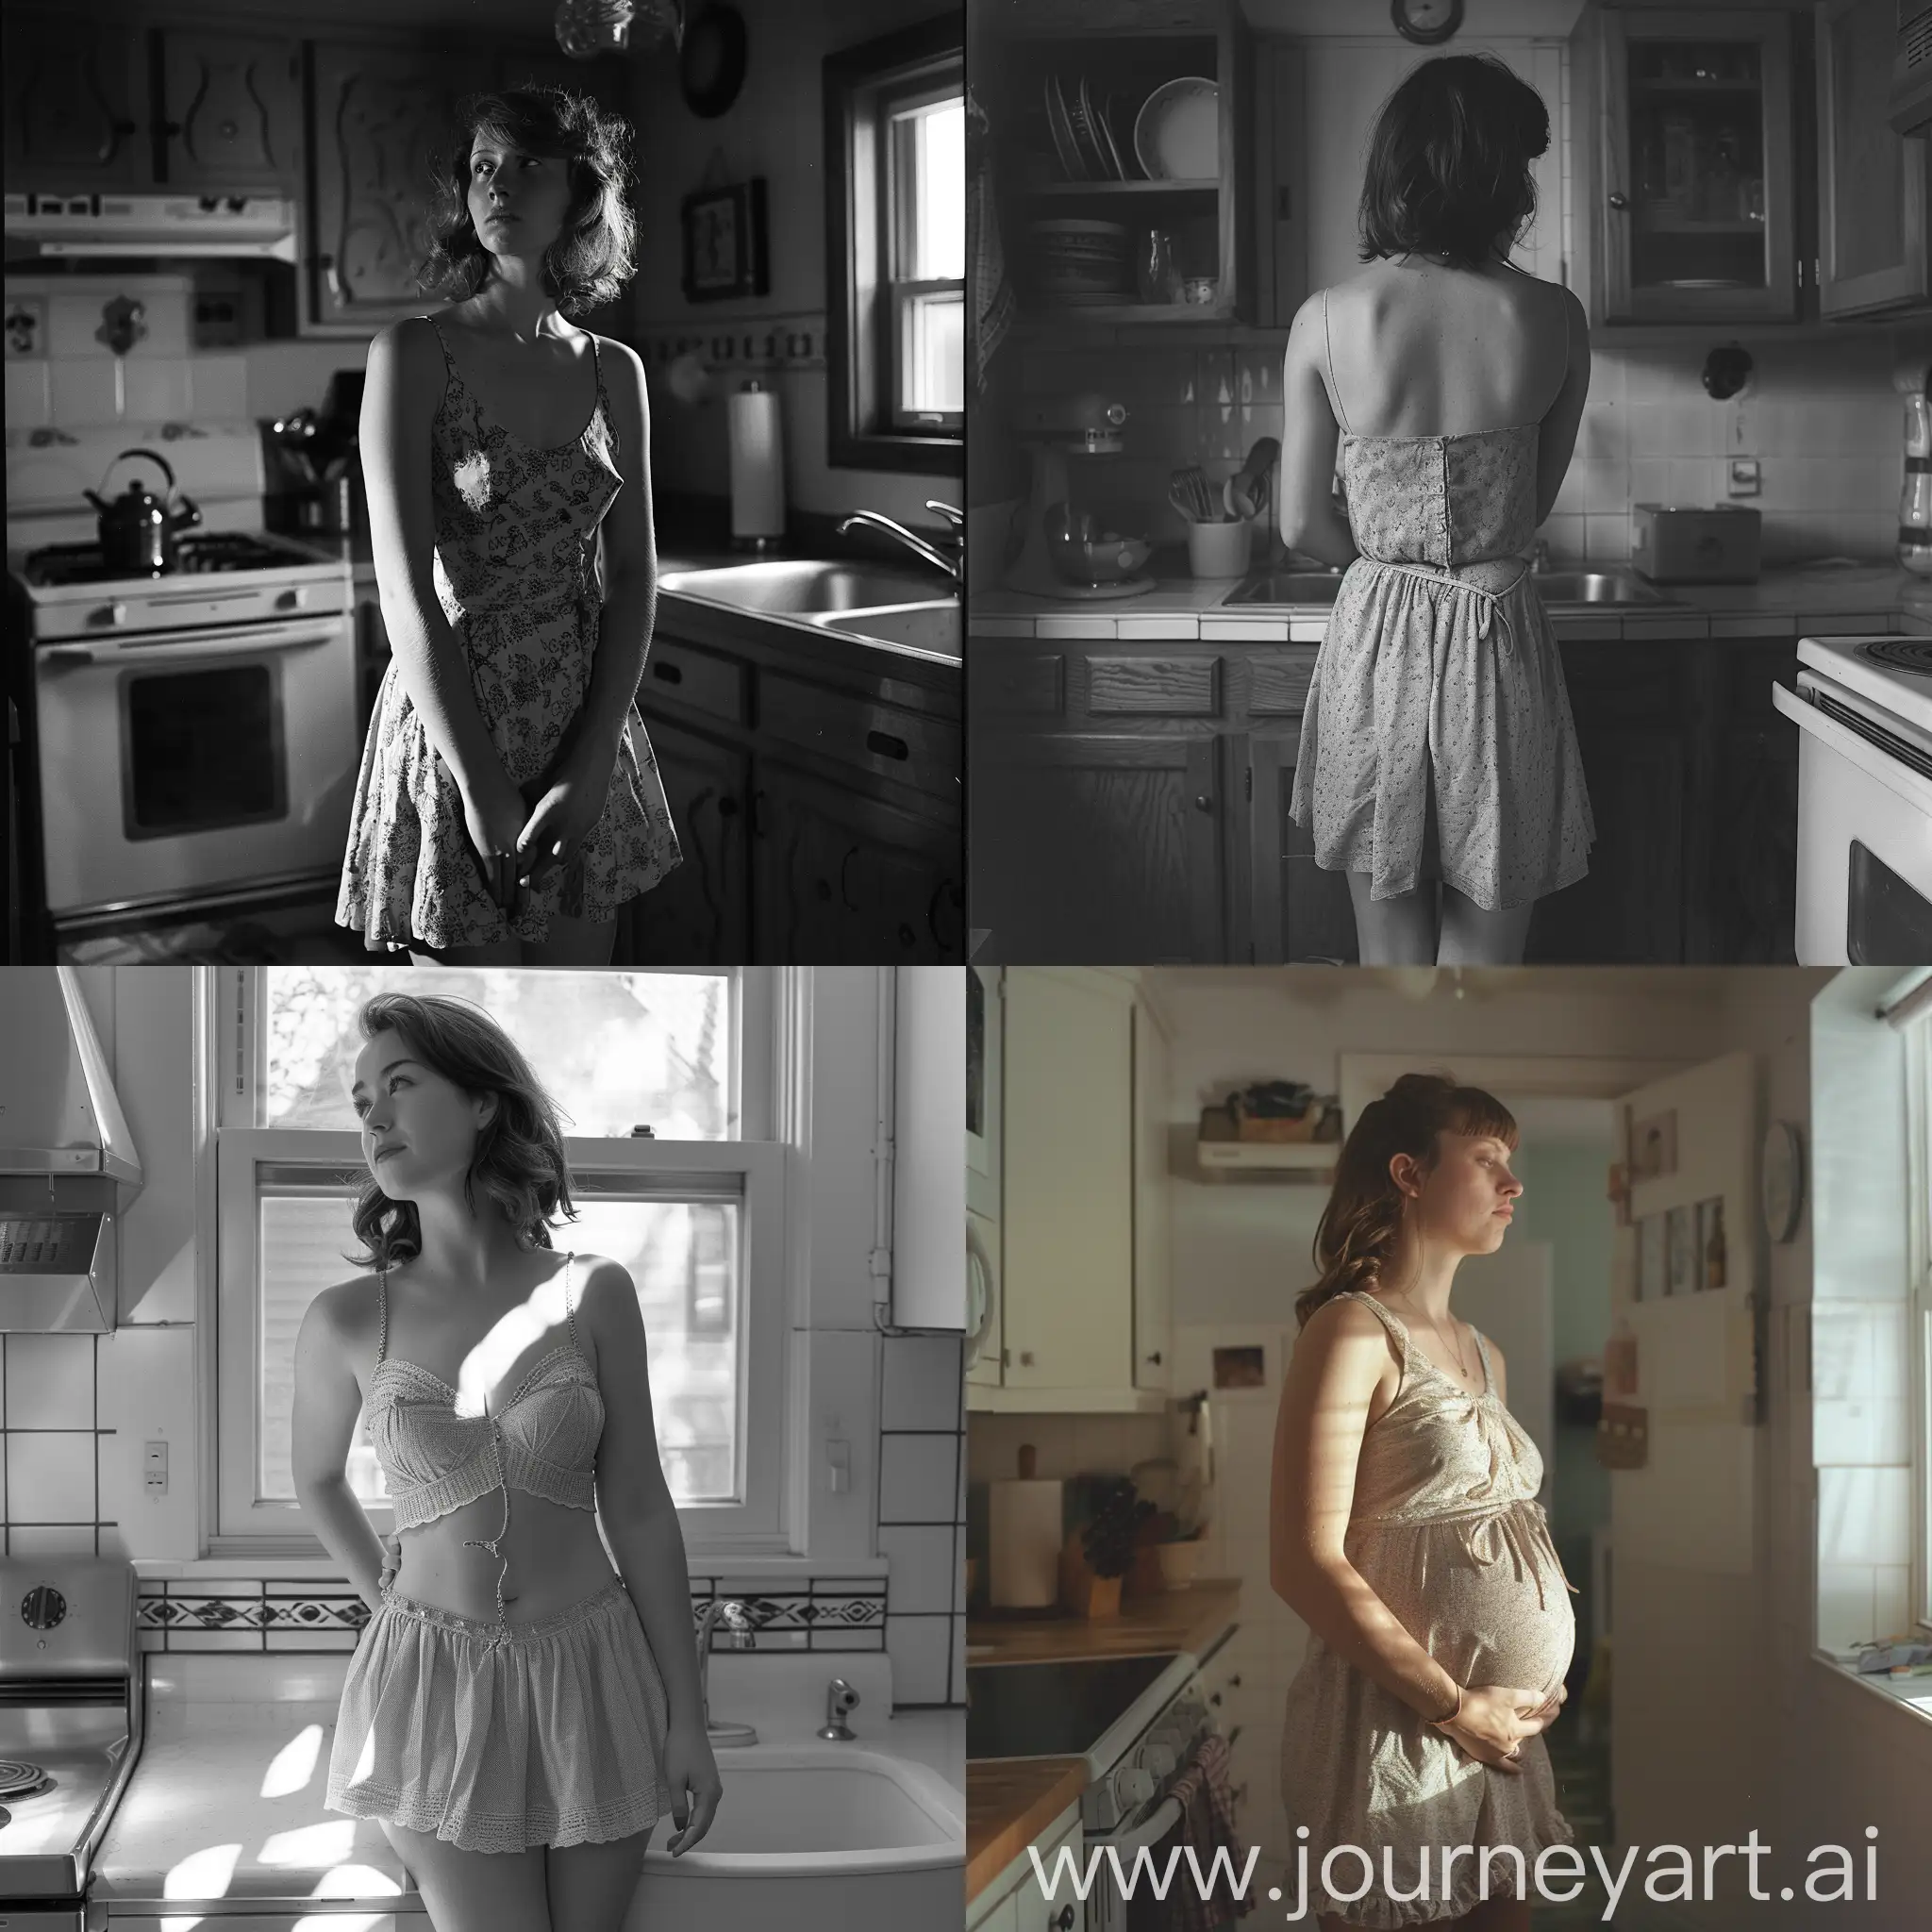 Young-Woman-Cooking-in-Kitchen-Full-Body-Shot-in-Dress